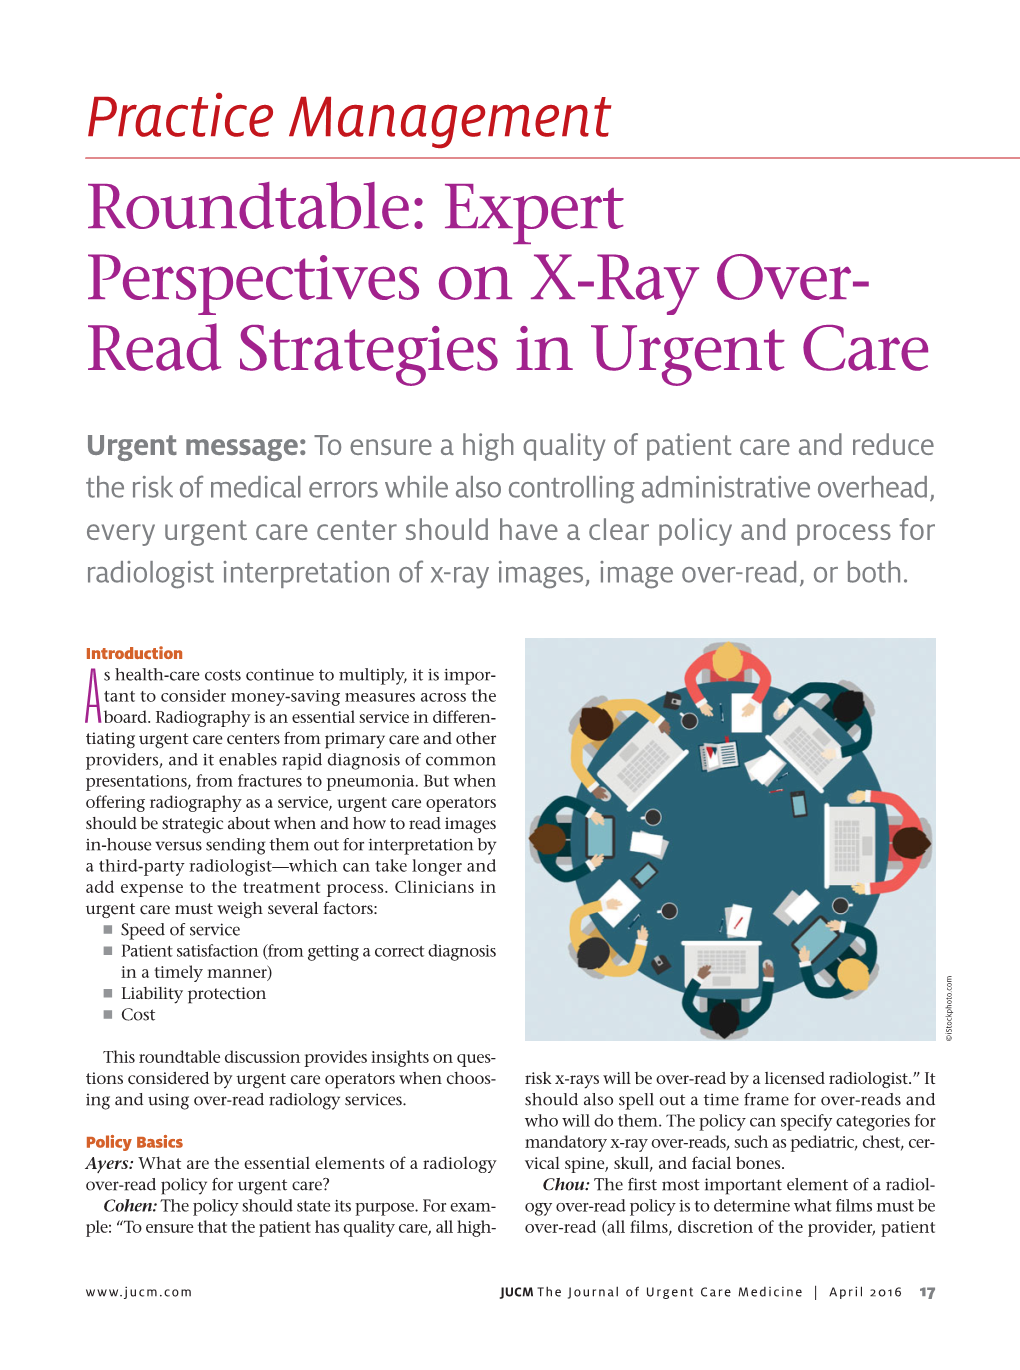 Practice Management Roundtable: Expert Perspectives on X-Ray Over- Read Strategies in Urgent Care